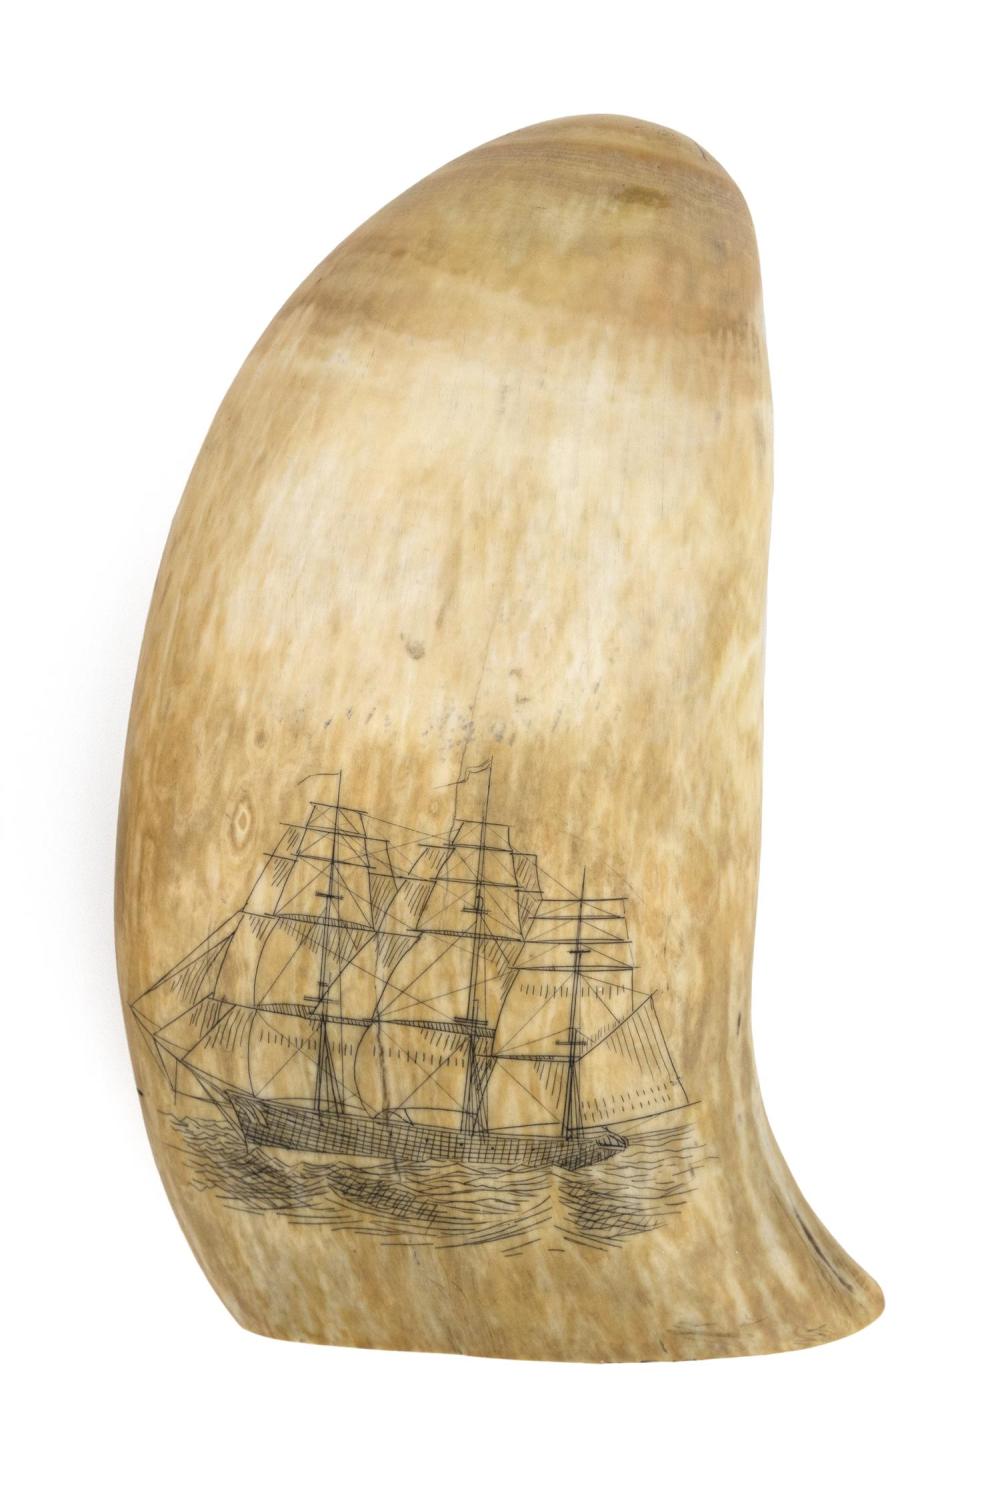 SCRIMSHAW WHALE S TOOTH WITH SHIP 34c65c